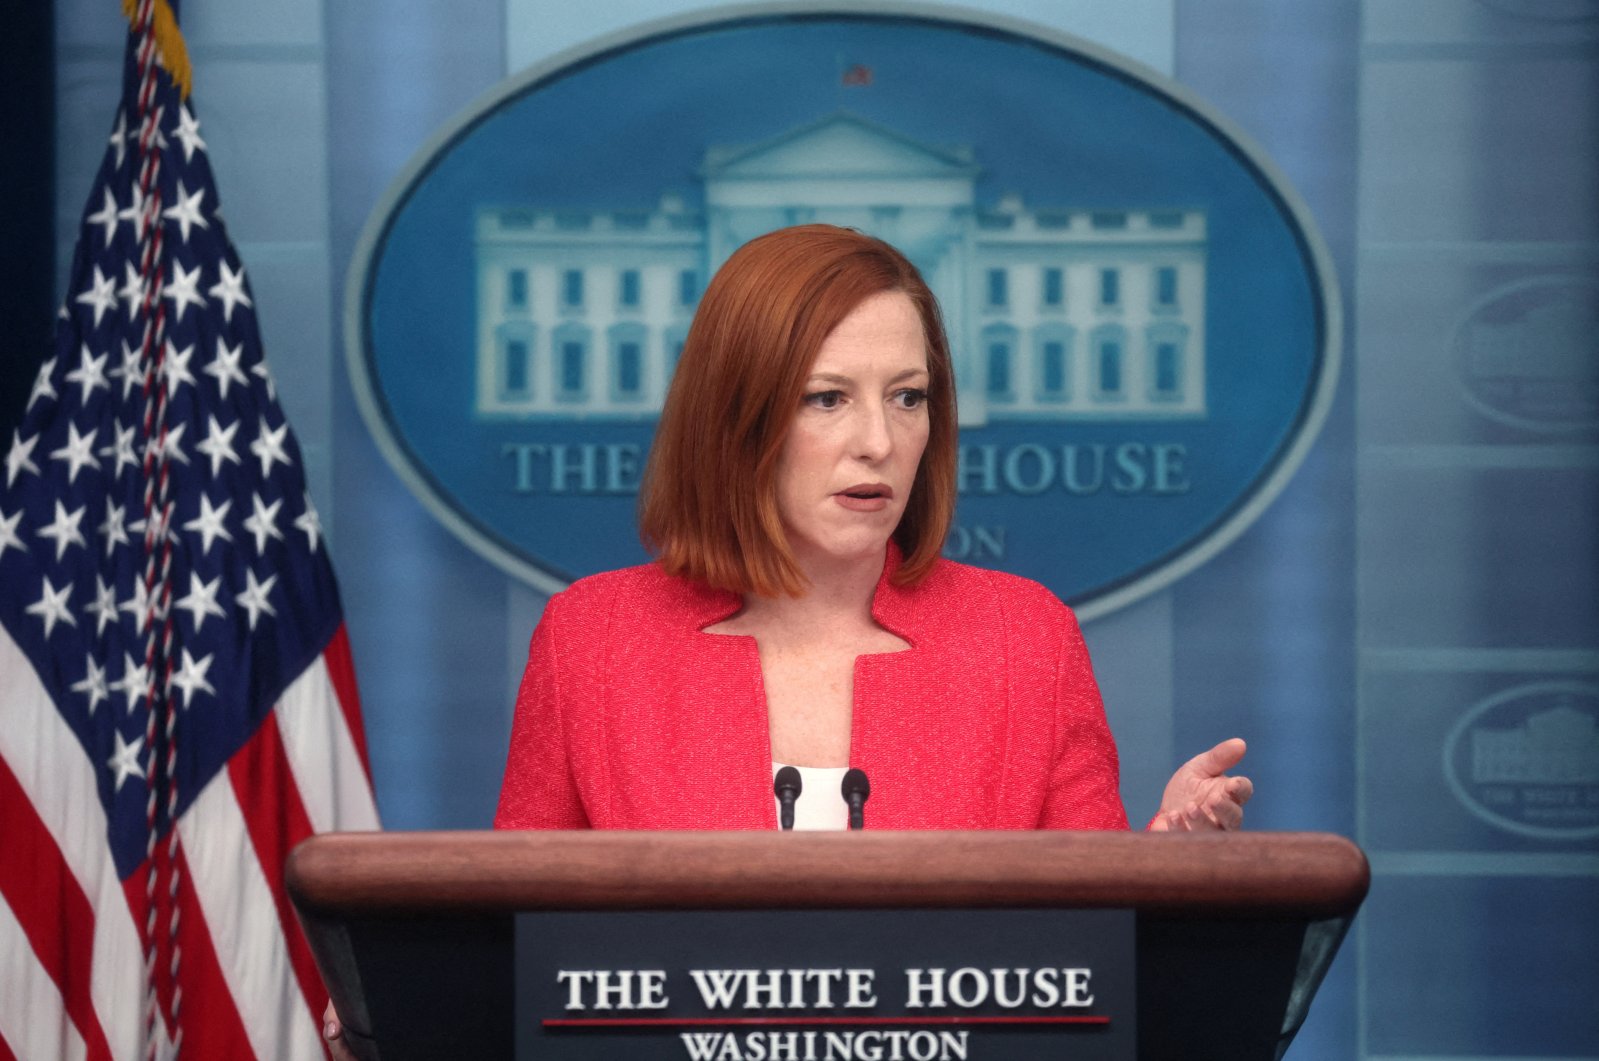 White House press secretary Jen Psaki holds a press briefing on the U.S. response after Russia launched a massive military operation against Ukraine, at the White House in Washington, U.S., Feb. 24, 2022. (Reuters Photo)